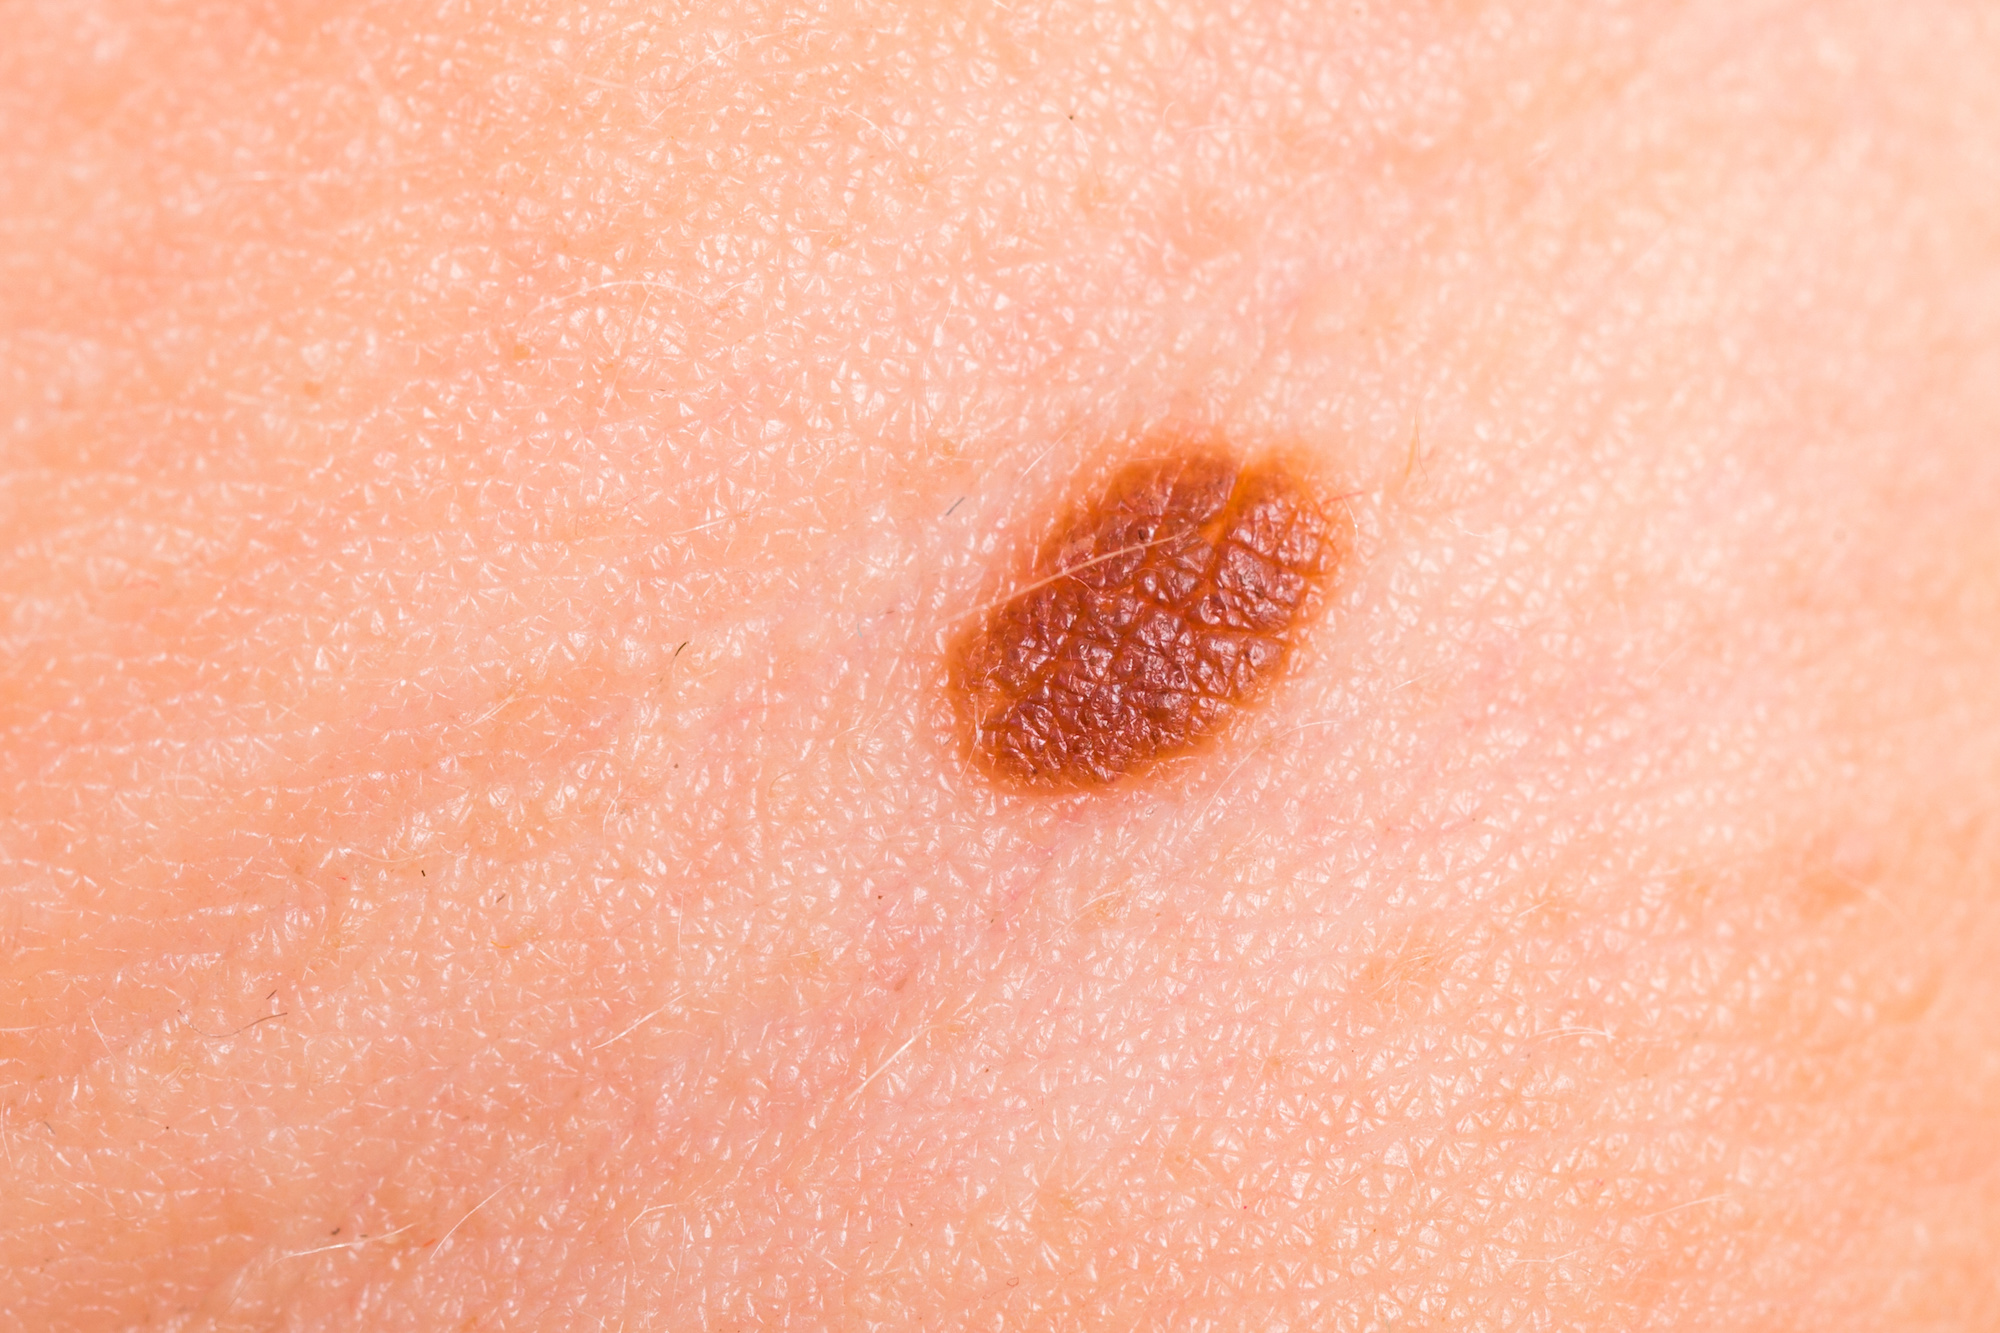 The ABC’s of Skin Cancer Detection